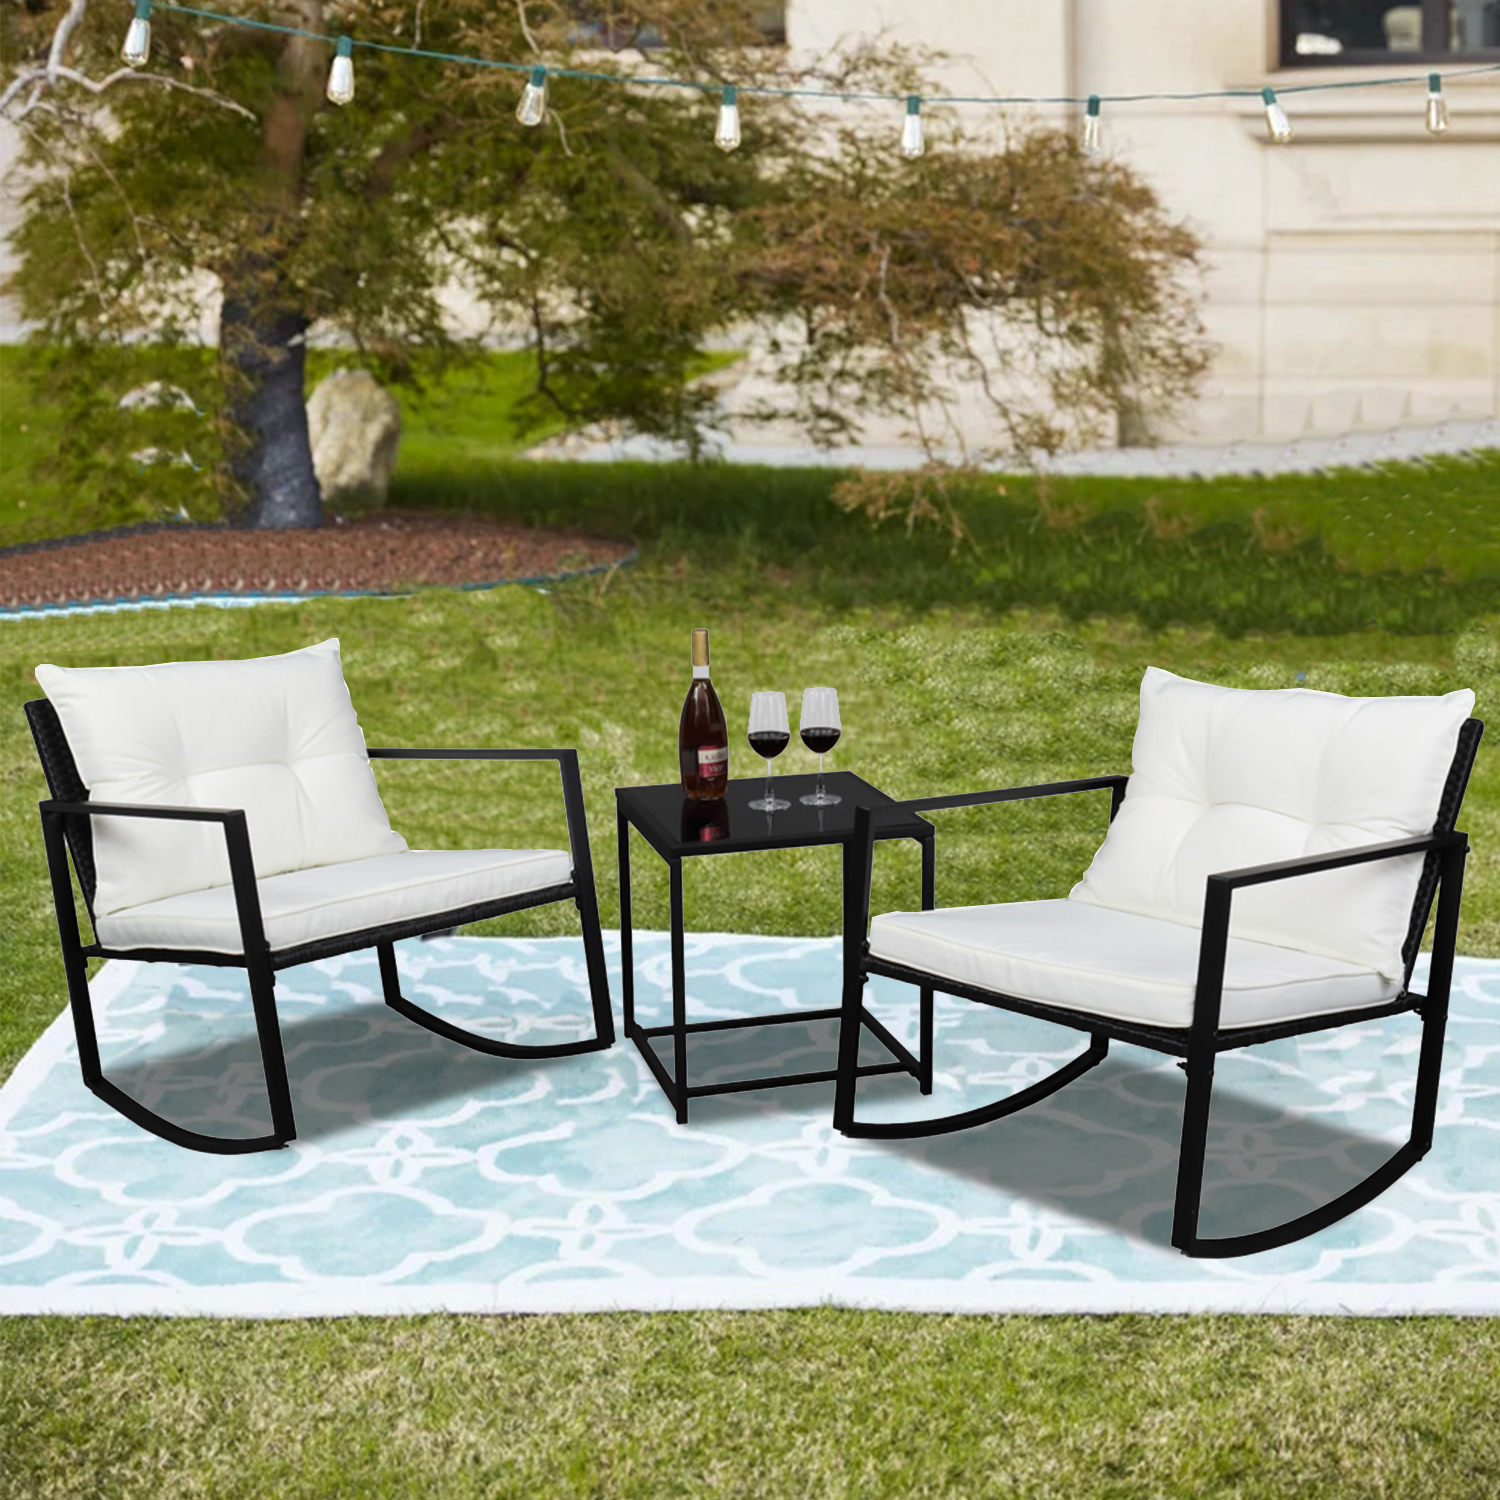 Outdoor Rocking Chair Sets Patio Furniture, 3 Piece Wicker Bistro Set with White Cushion Rocking Chairs and Coffee Table, Patio Rocking Chair Set for Backyard Garden, All-Weather Rocking Chair, W10671 - image 1 of 9